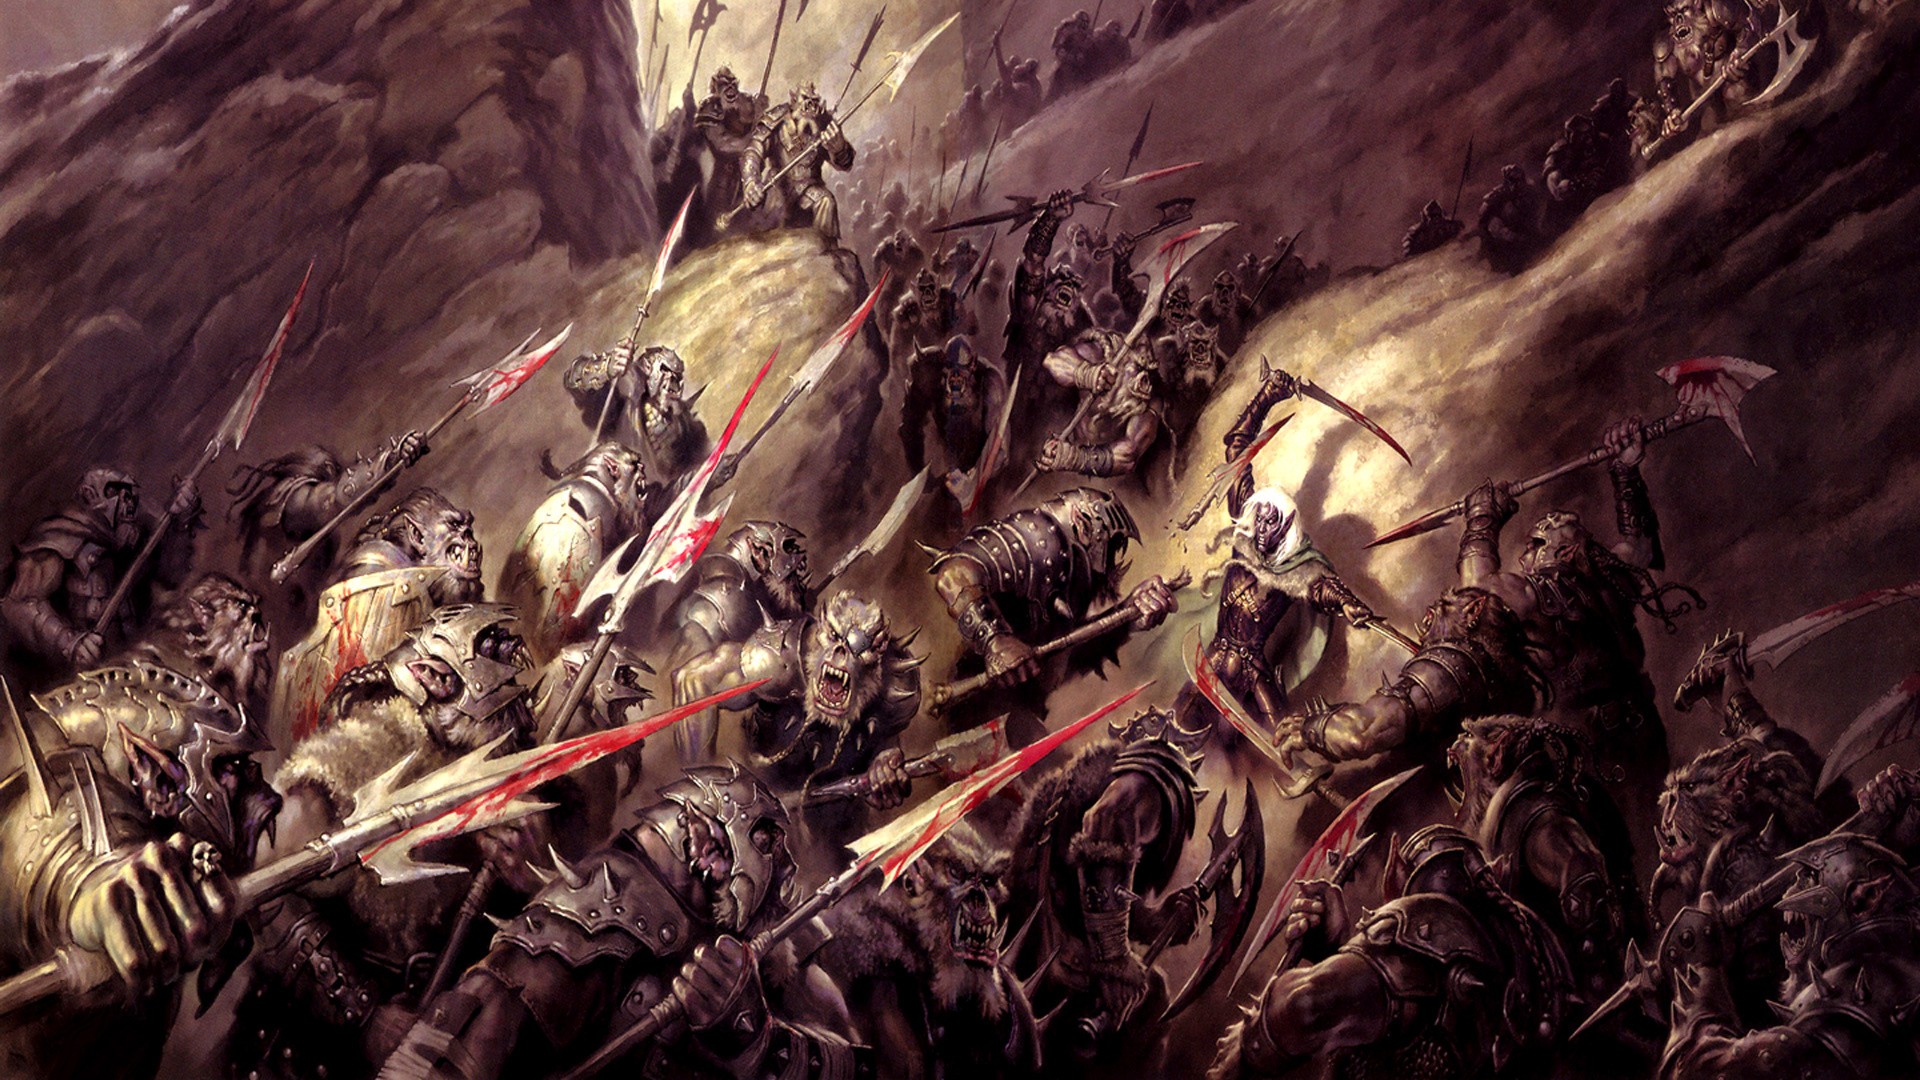 Wallpaper Fantasy Art Armor Dnd Orcs Axes Dungeons And